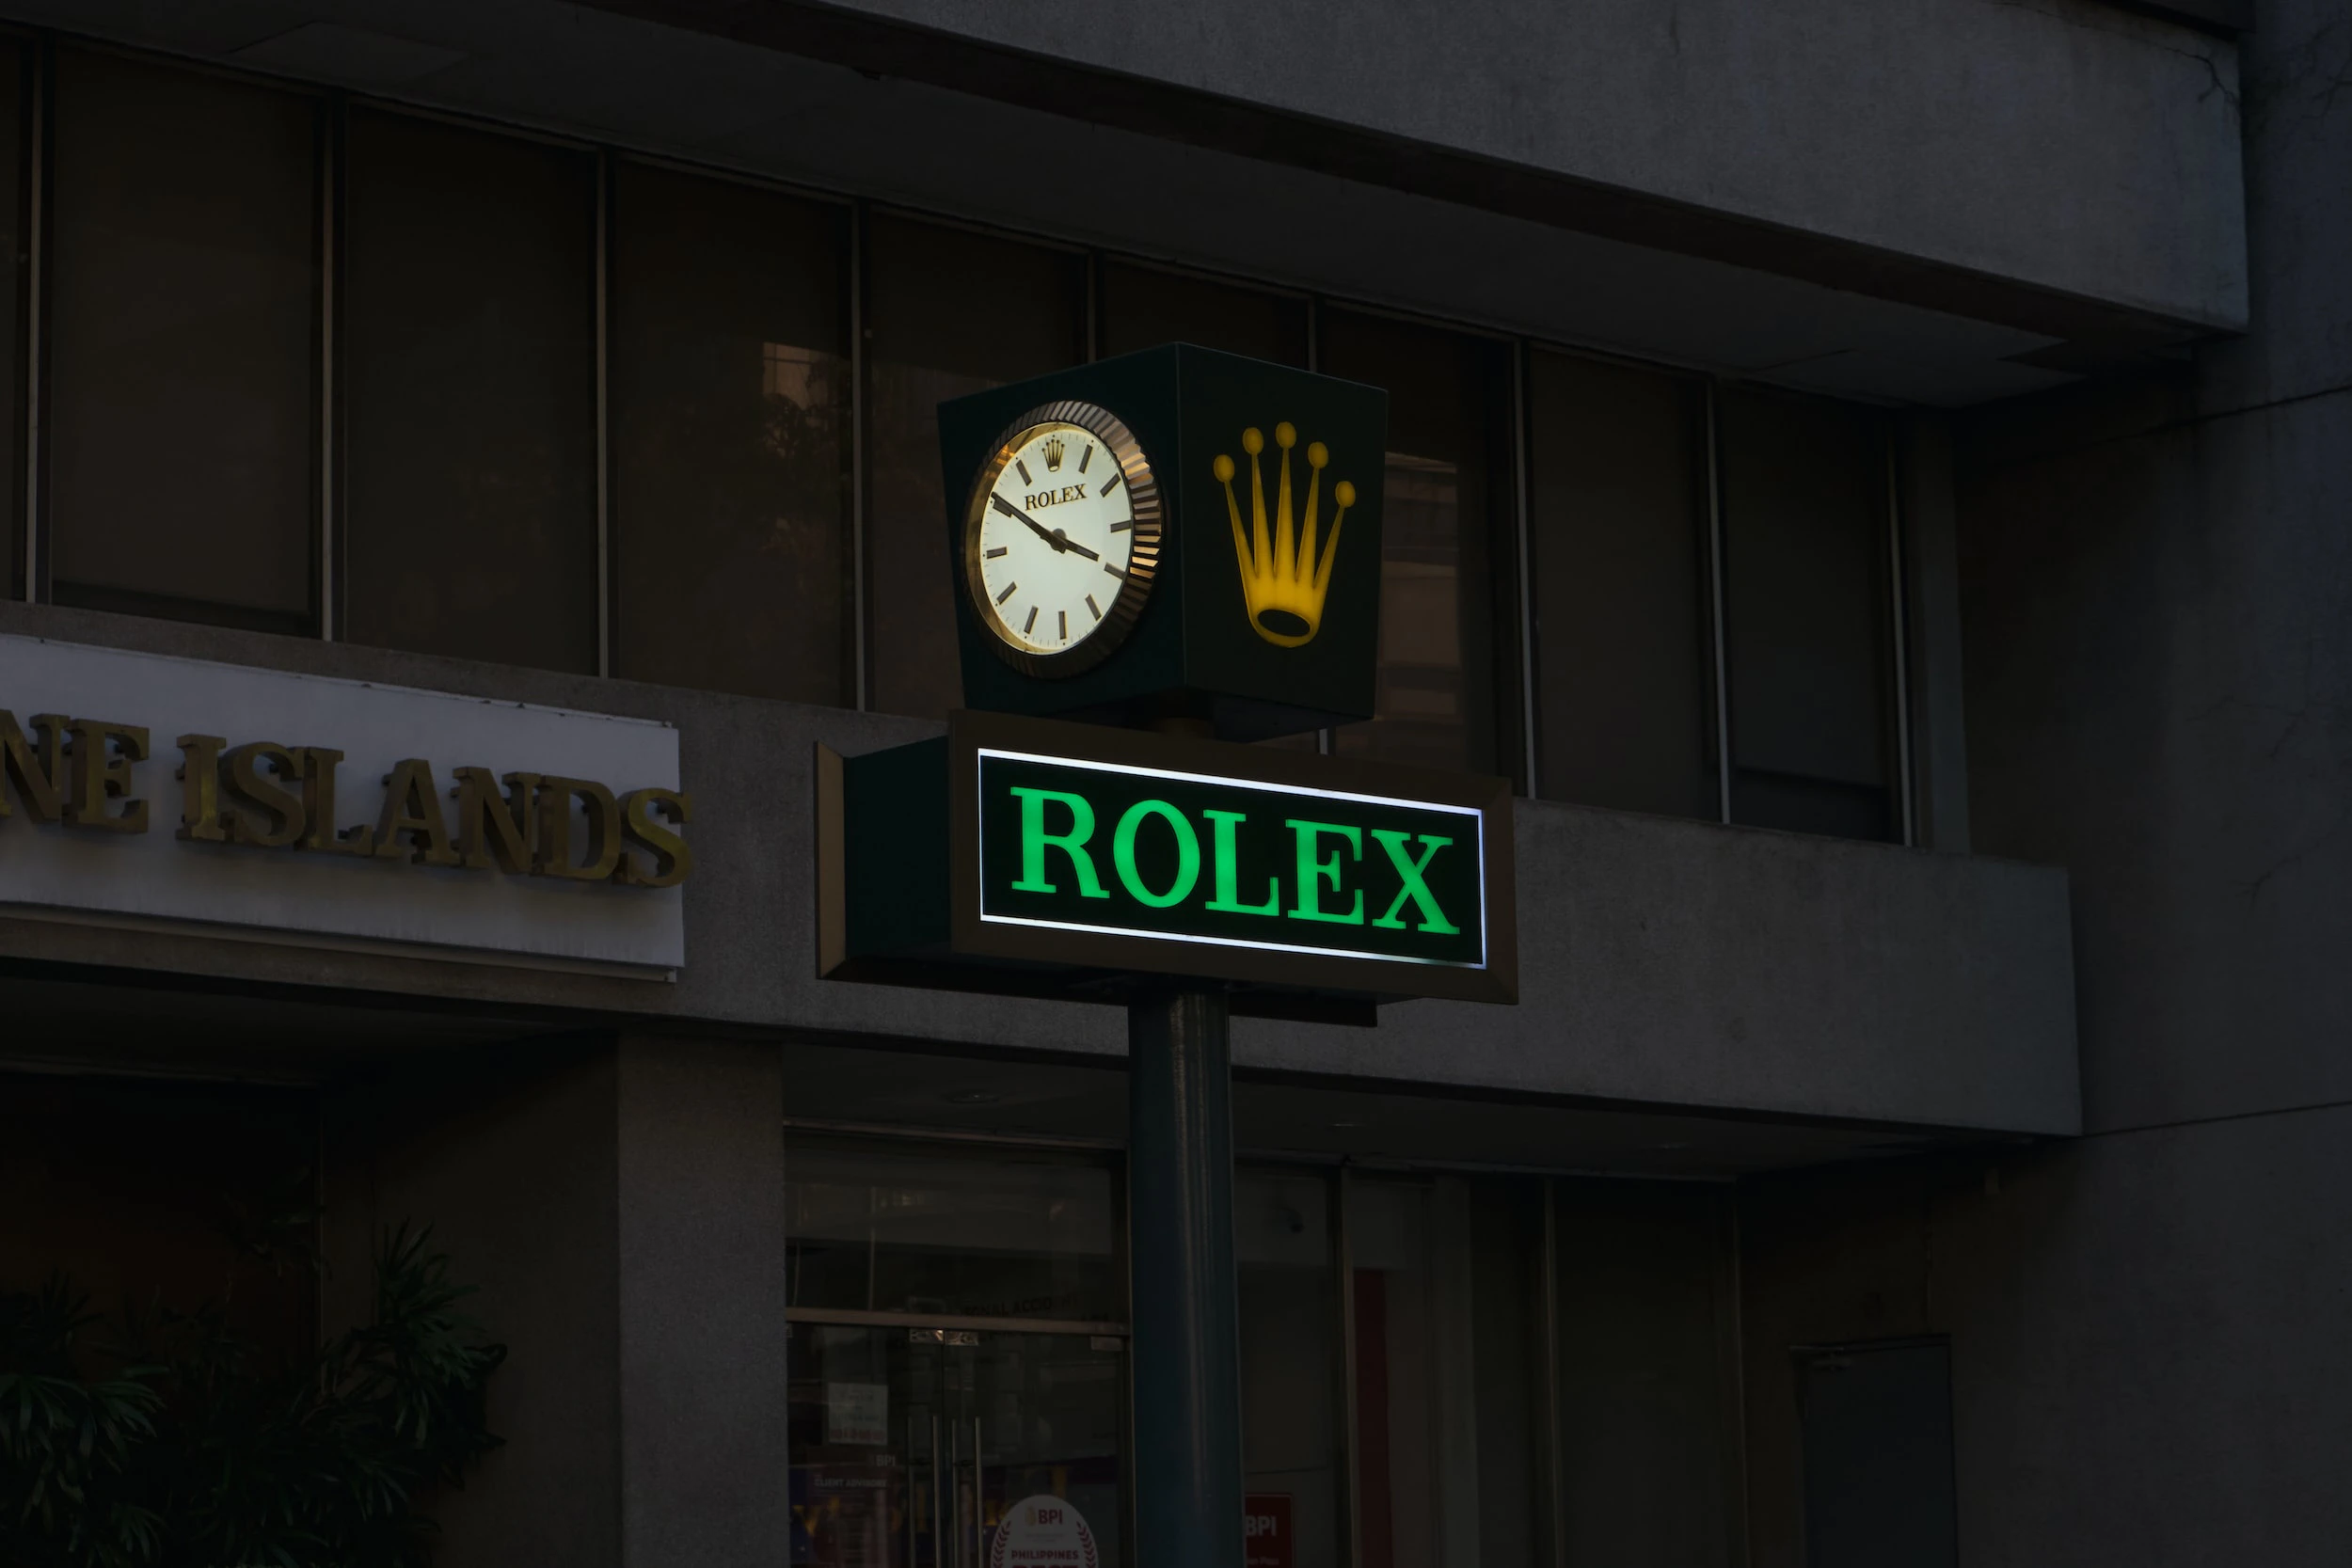 Find the year of manufacture of your Rolex watch